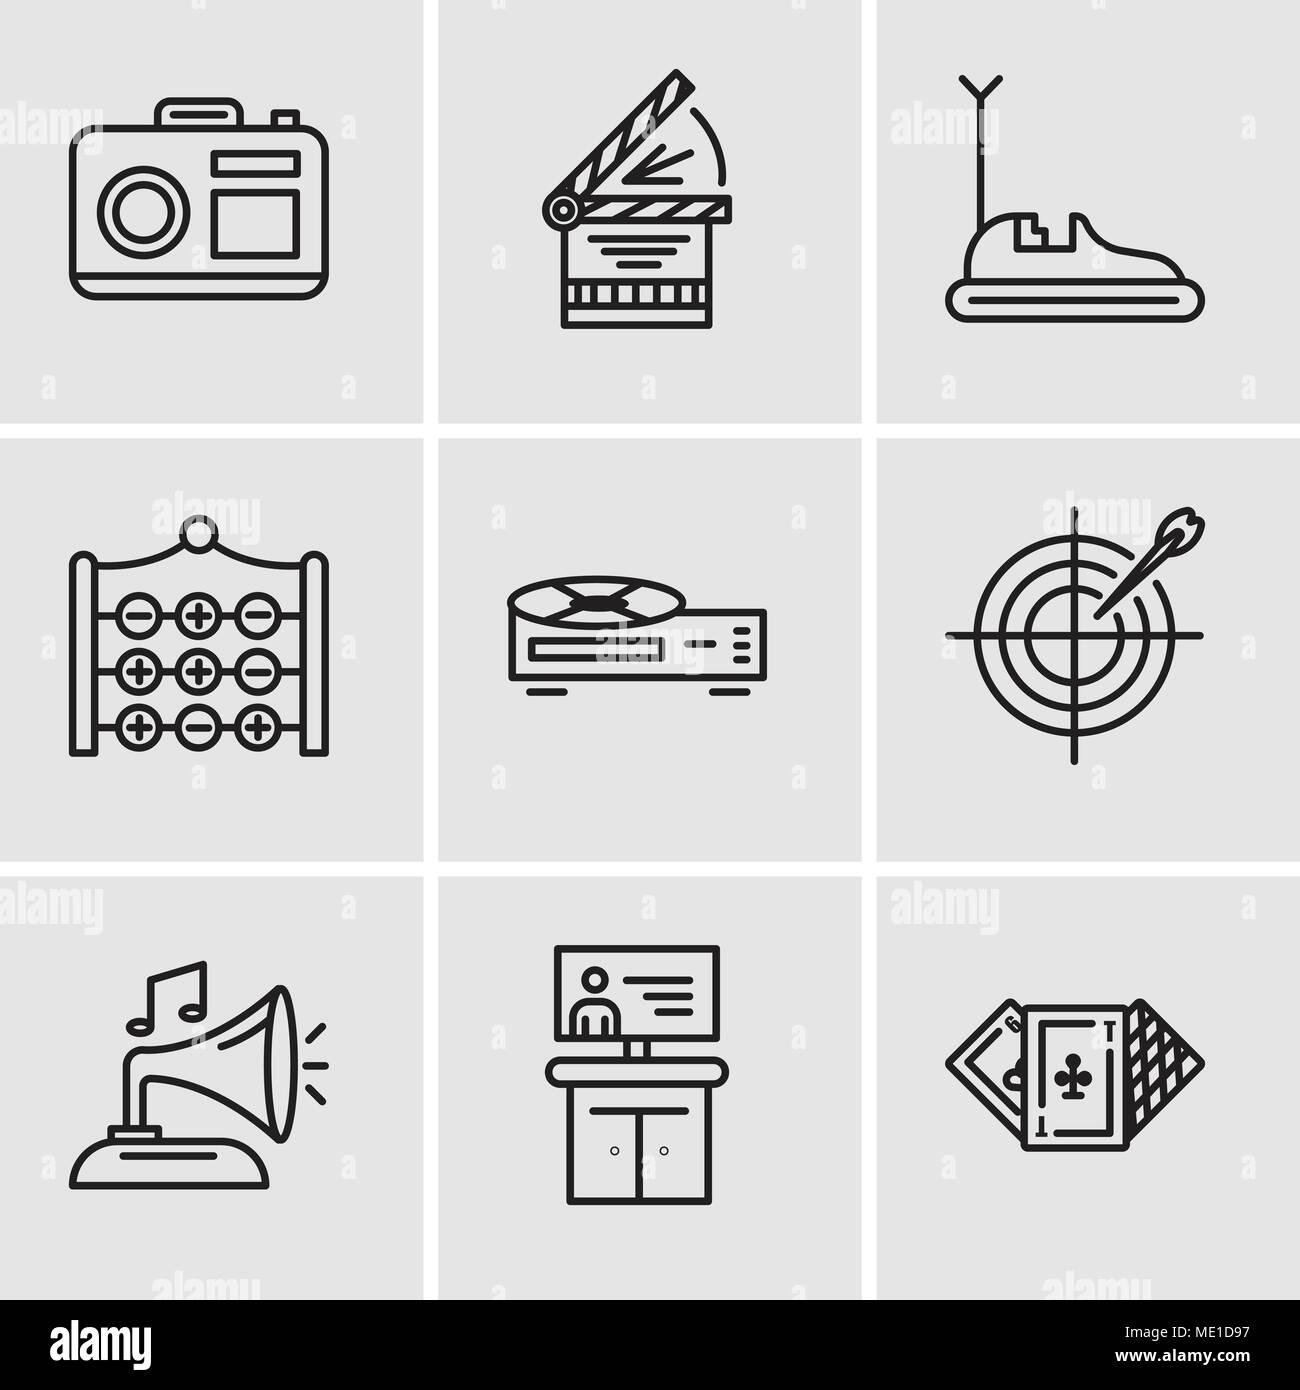 Set Of 9 simple editable icons such as Casino, Tv, Gramphone, Darts, Video recorder, Tic tac toe, Bumper car, Clapperboard, Camera, can be used for mo Stock Vector